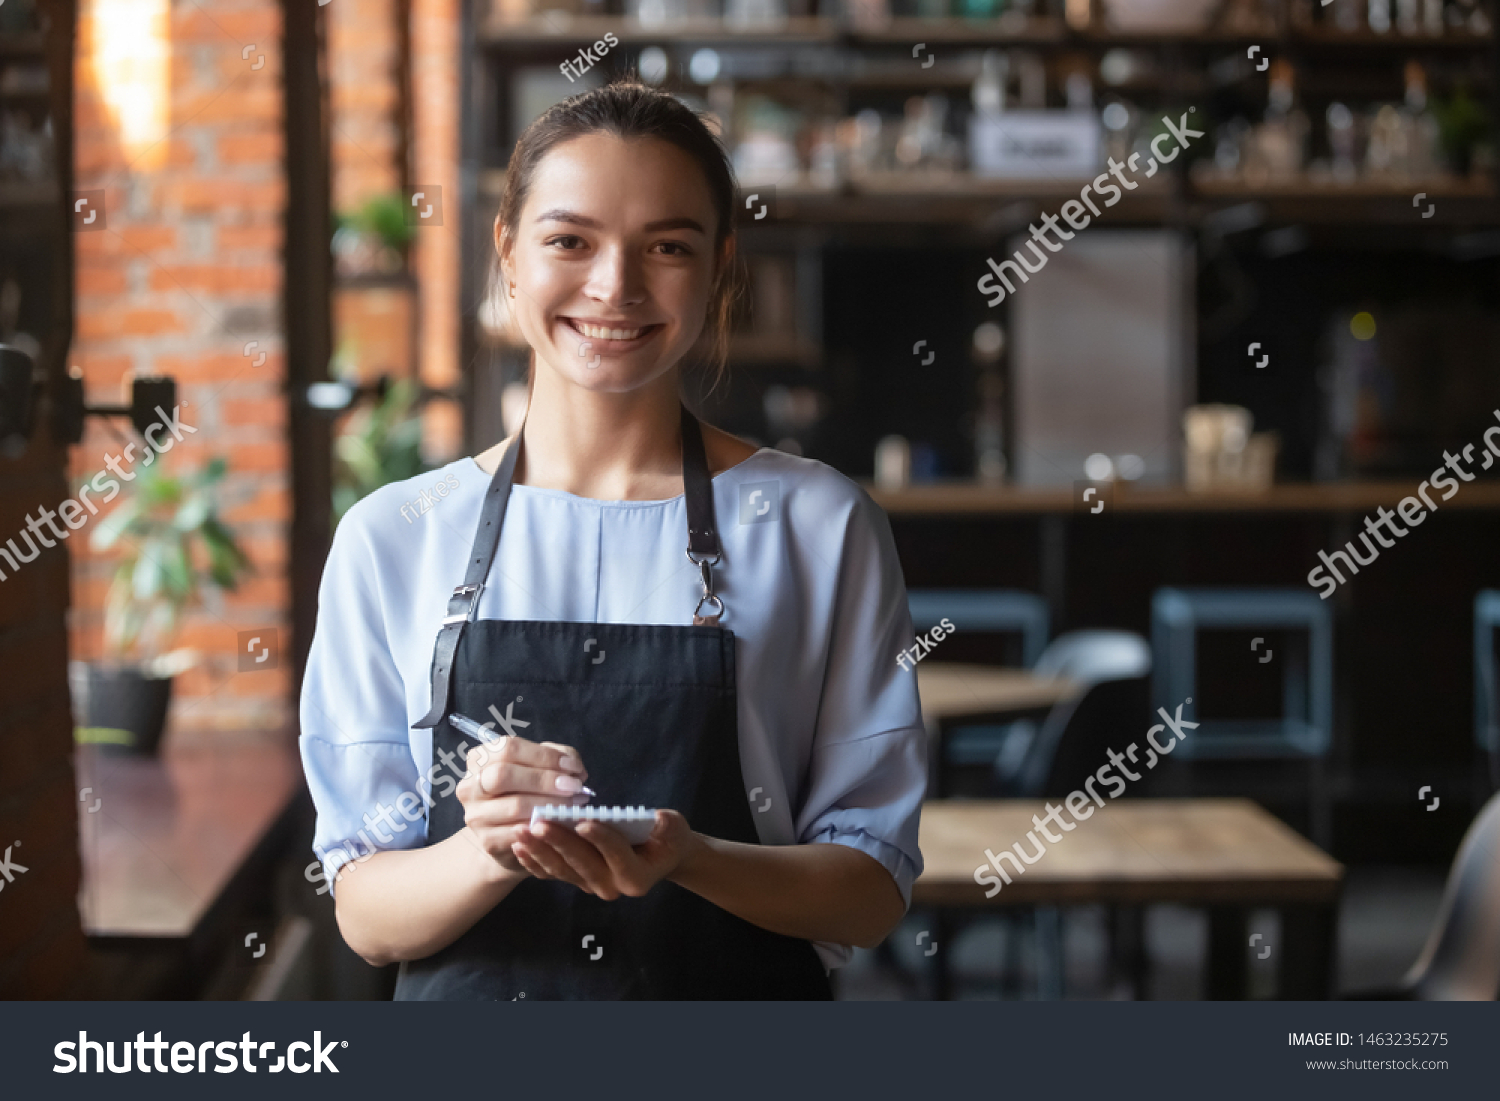 Portrait of smiling millennial waitress standing wearing uniform holding notebook looking at camera, positive happy cafe or restaurant female staff in apron ready to take order. Good service concept #1463235275